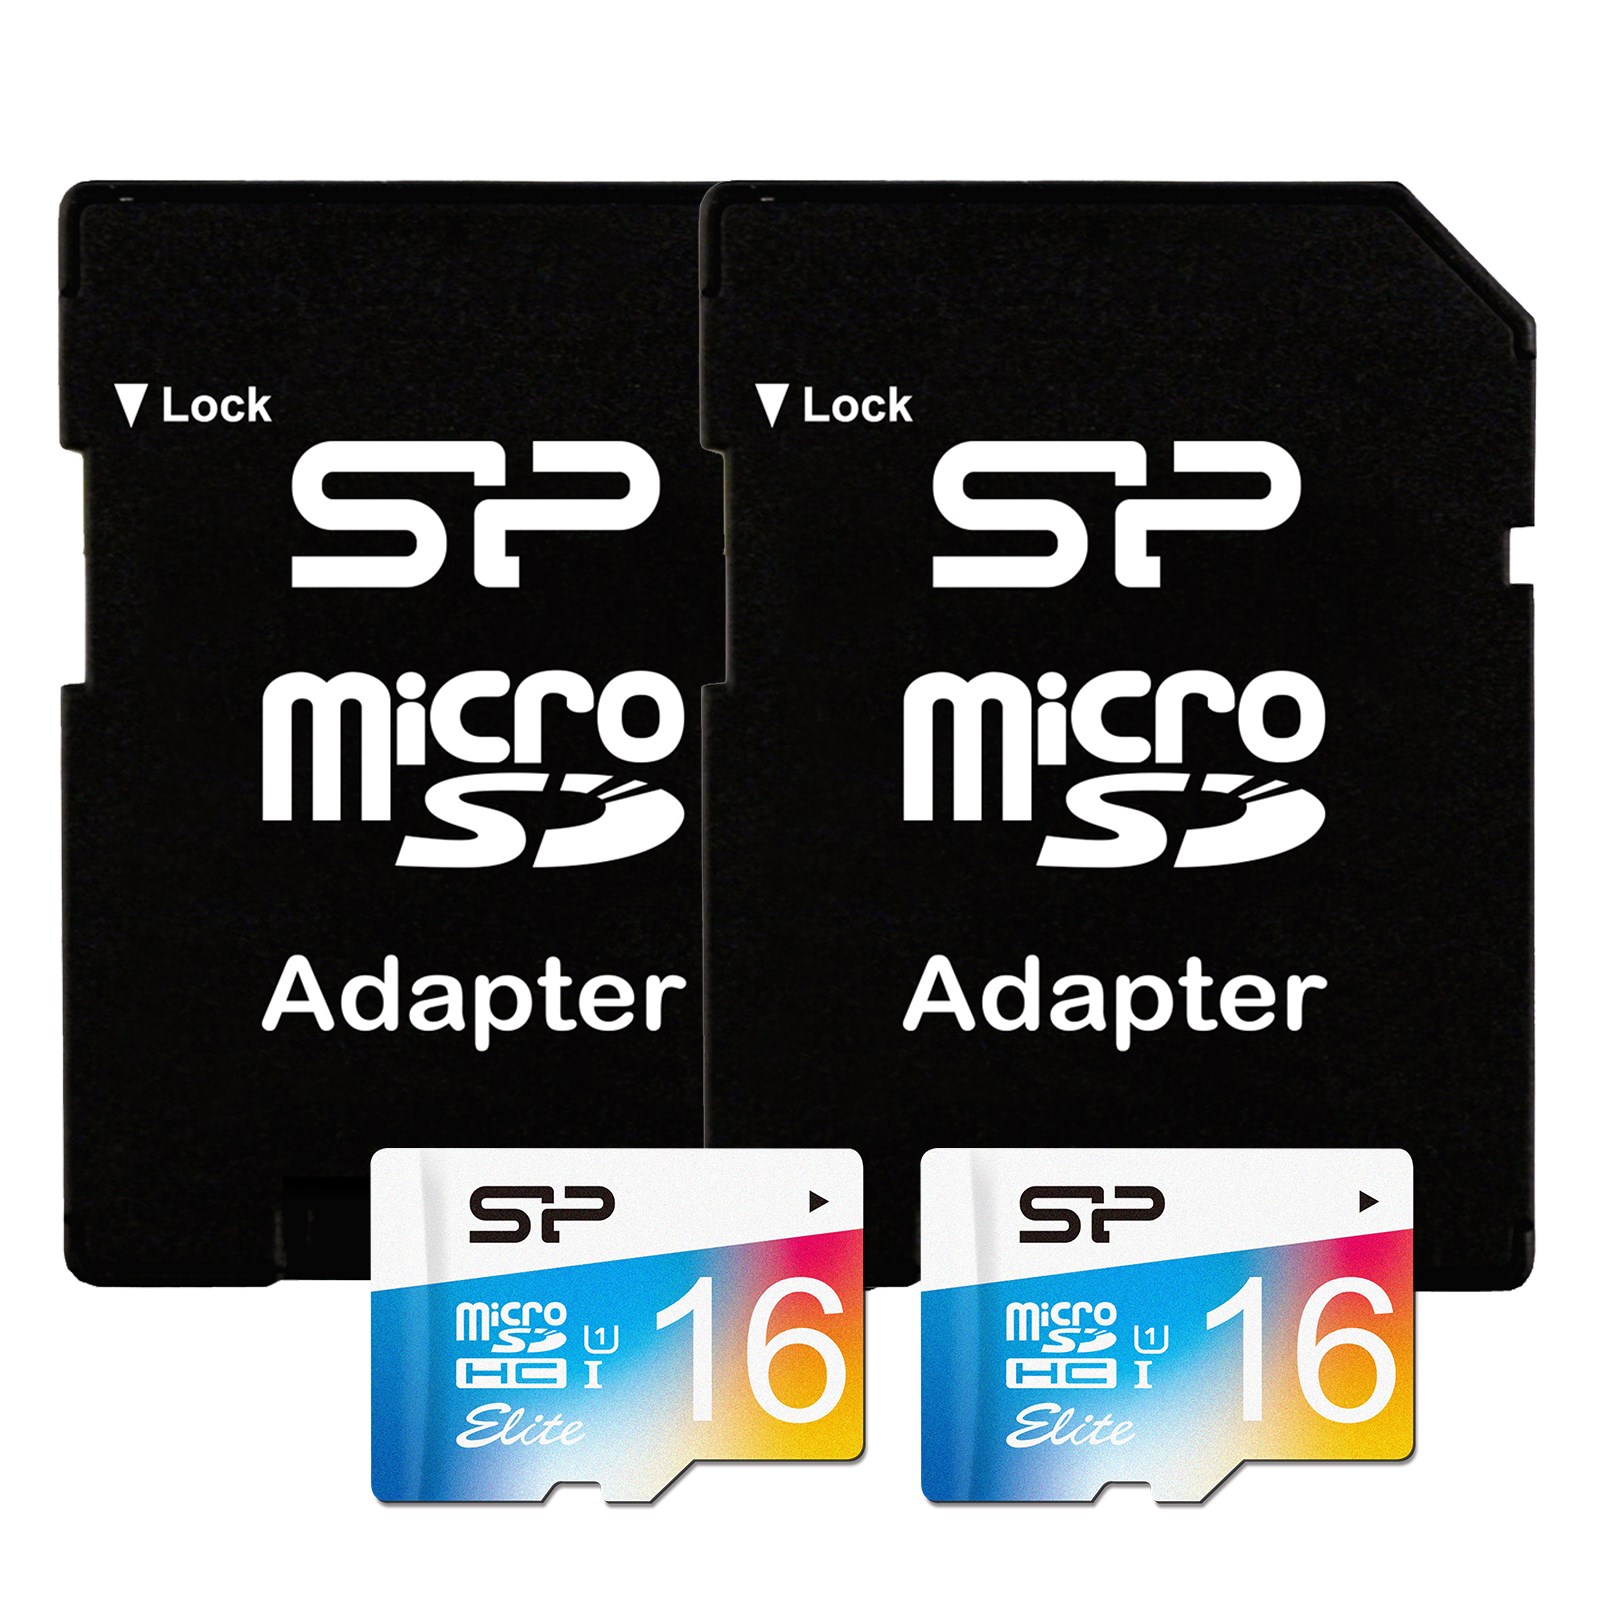 Silicon Power 16GB microSDHC UHS-1 Class 10 (with Adapter)X 2PACK